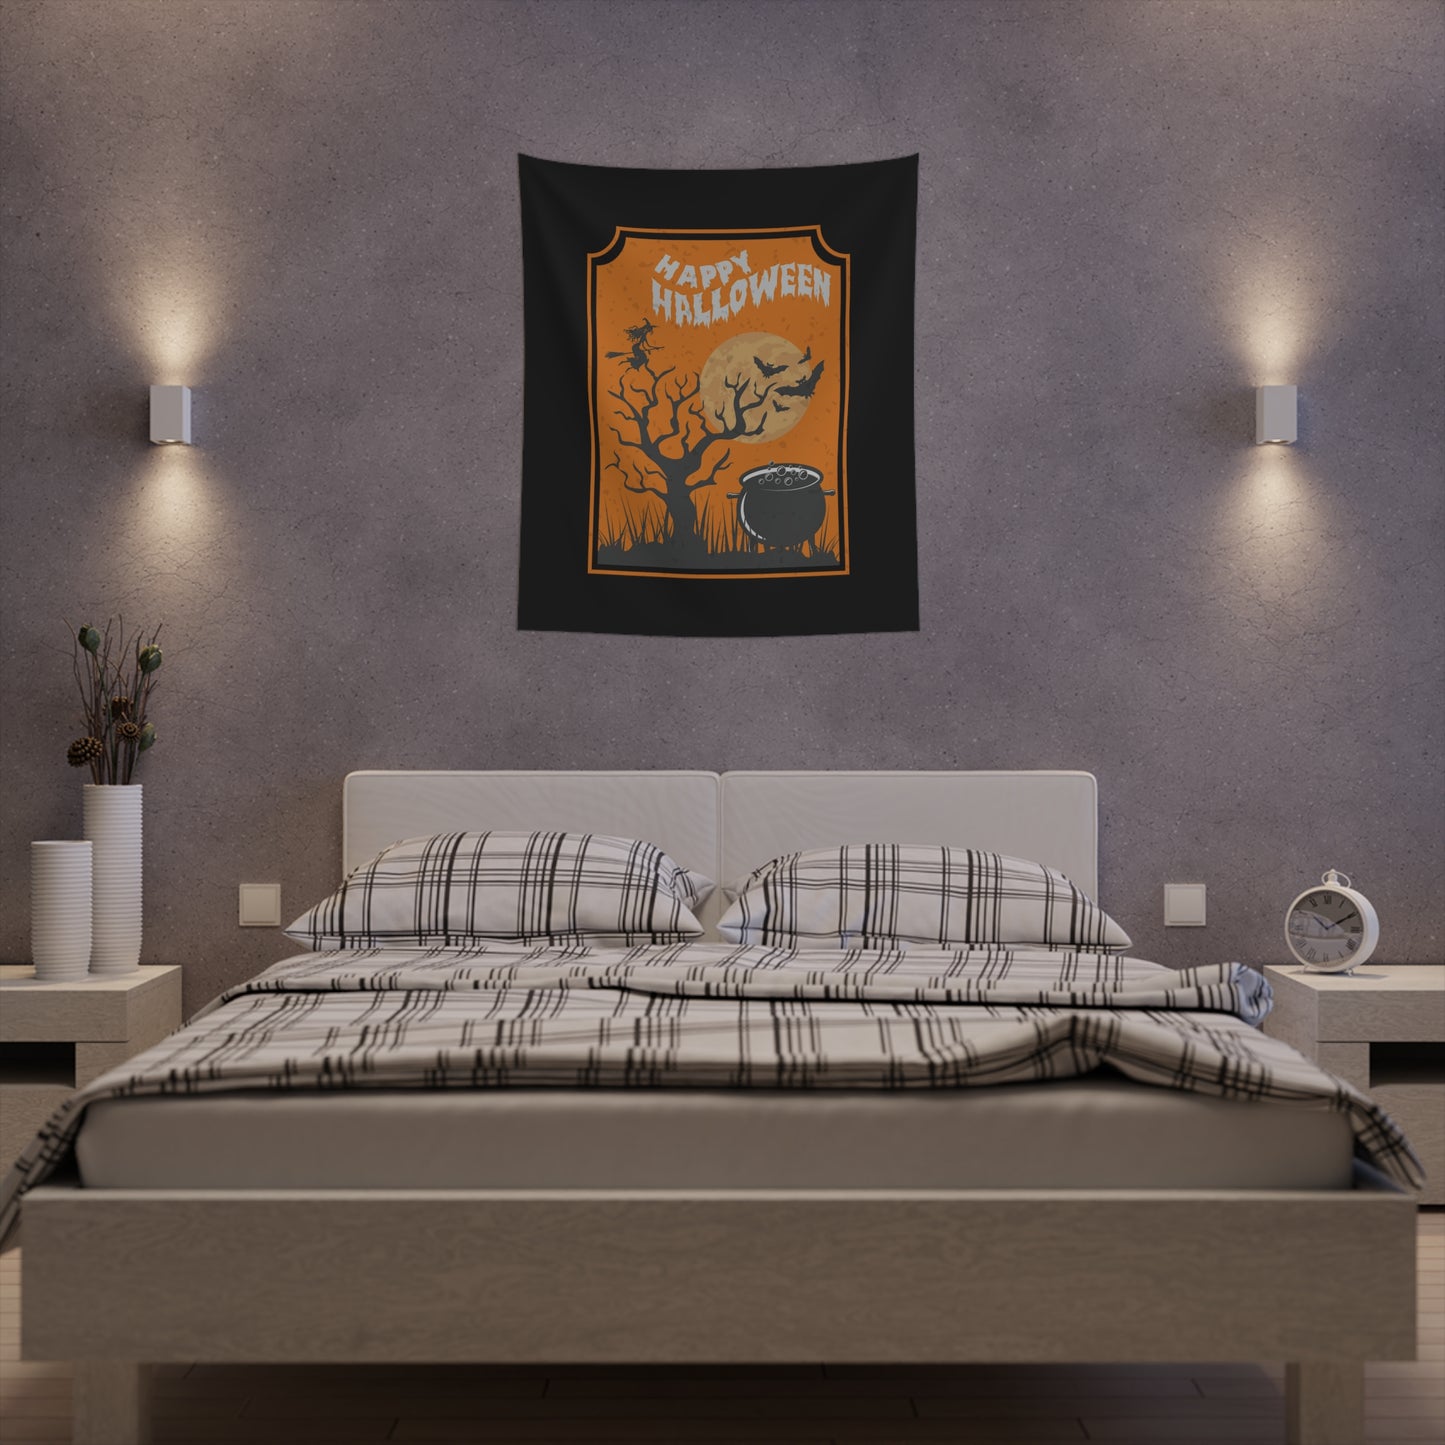 Happy Halloween With A Flare Printed Wall Tapestry